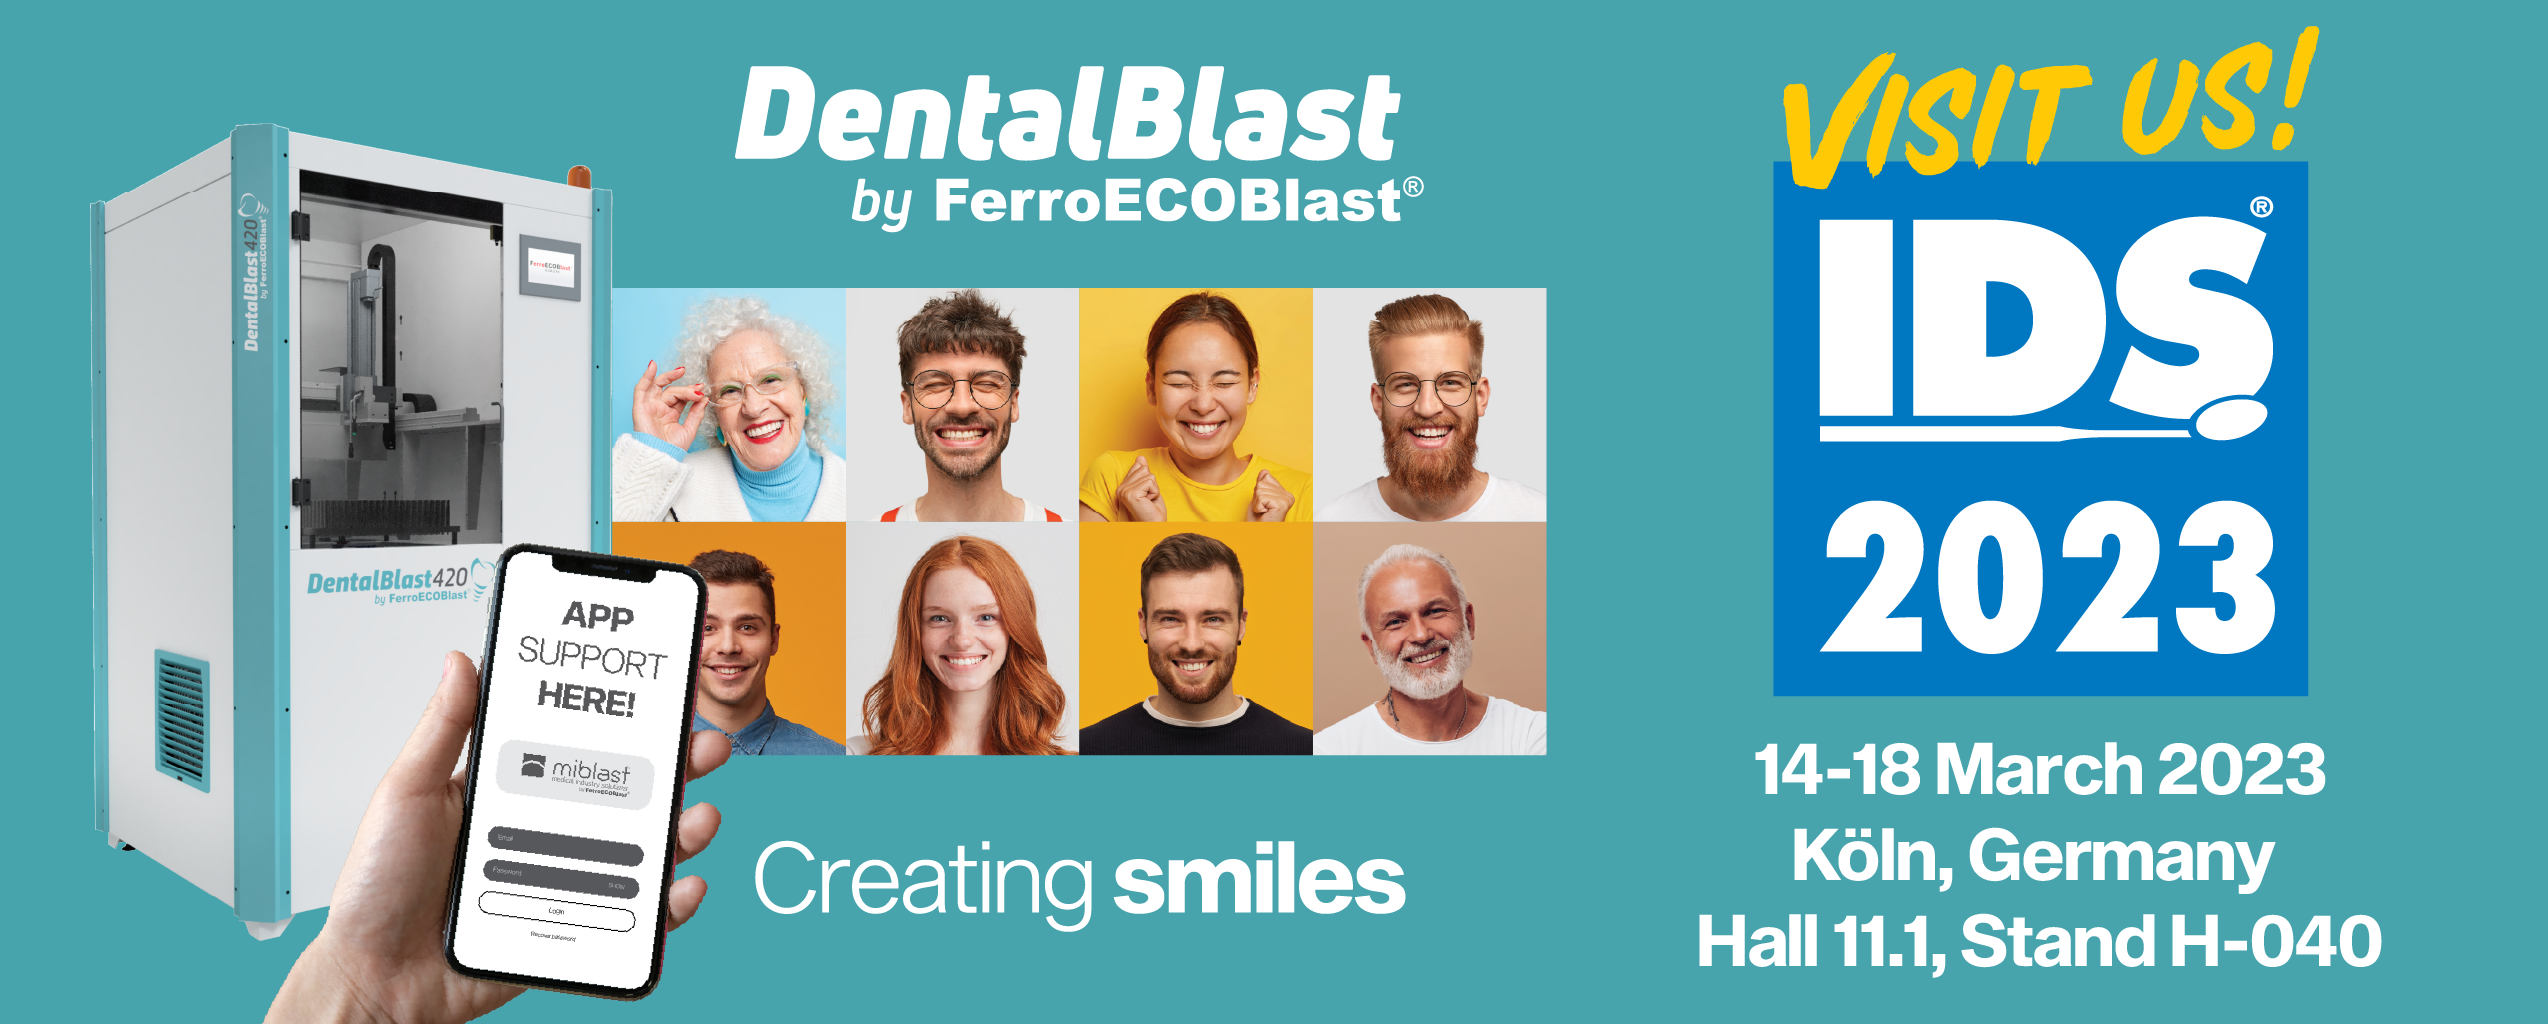 <h2>Meet DentalBlast by FerroECOBlast at <span style="color: rgb(196, 22, 28);"><strong>IDS 2023!</strong></span></h2>